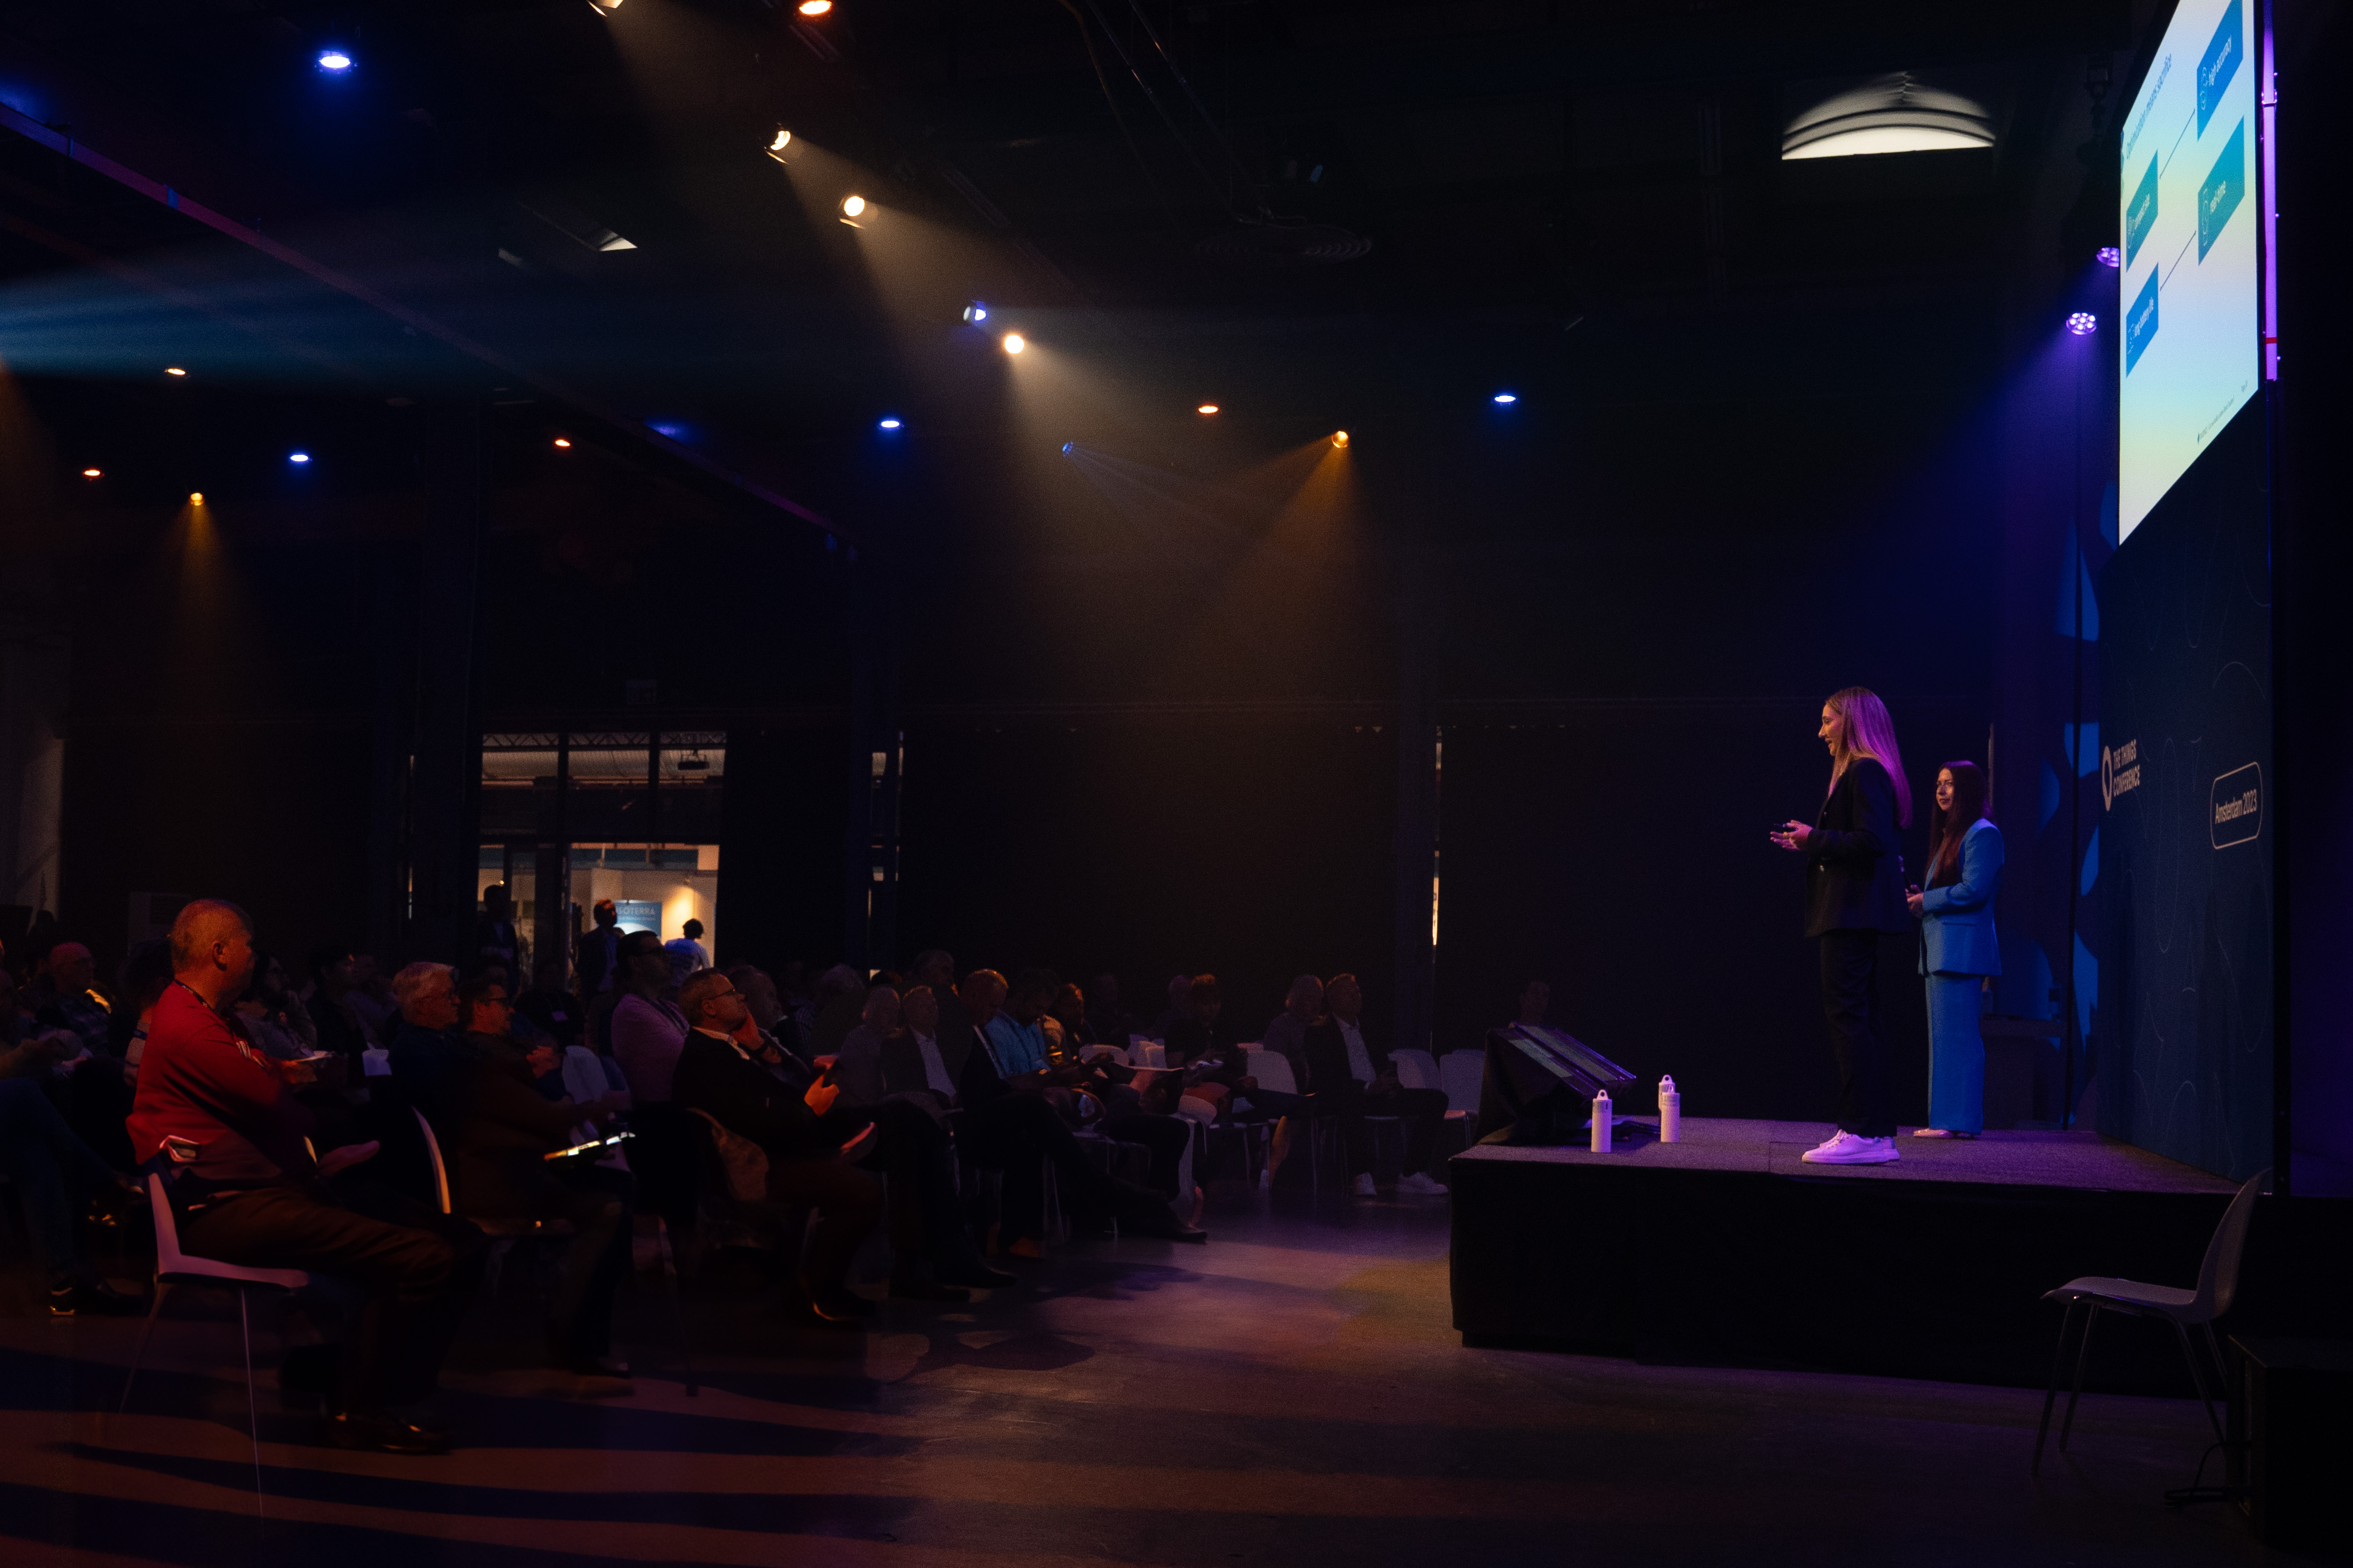 Managing Director Chiara Koopmans launching truvami on stage at the Things Conference in Amsterdam (Photo: Business Wire)